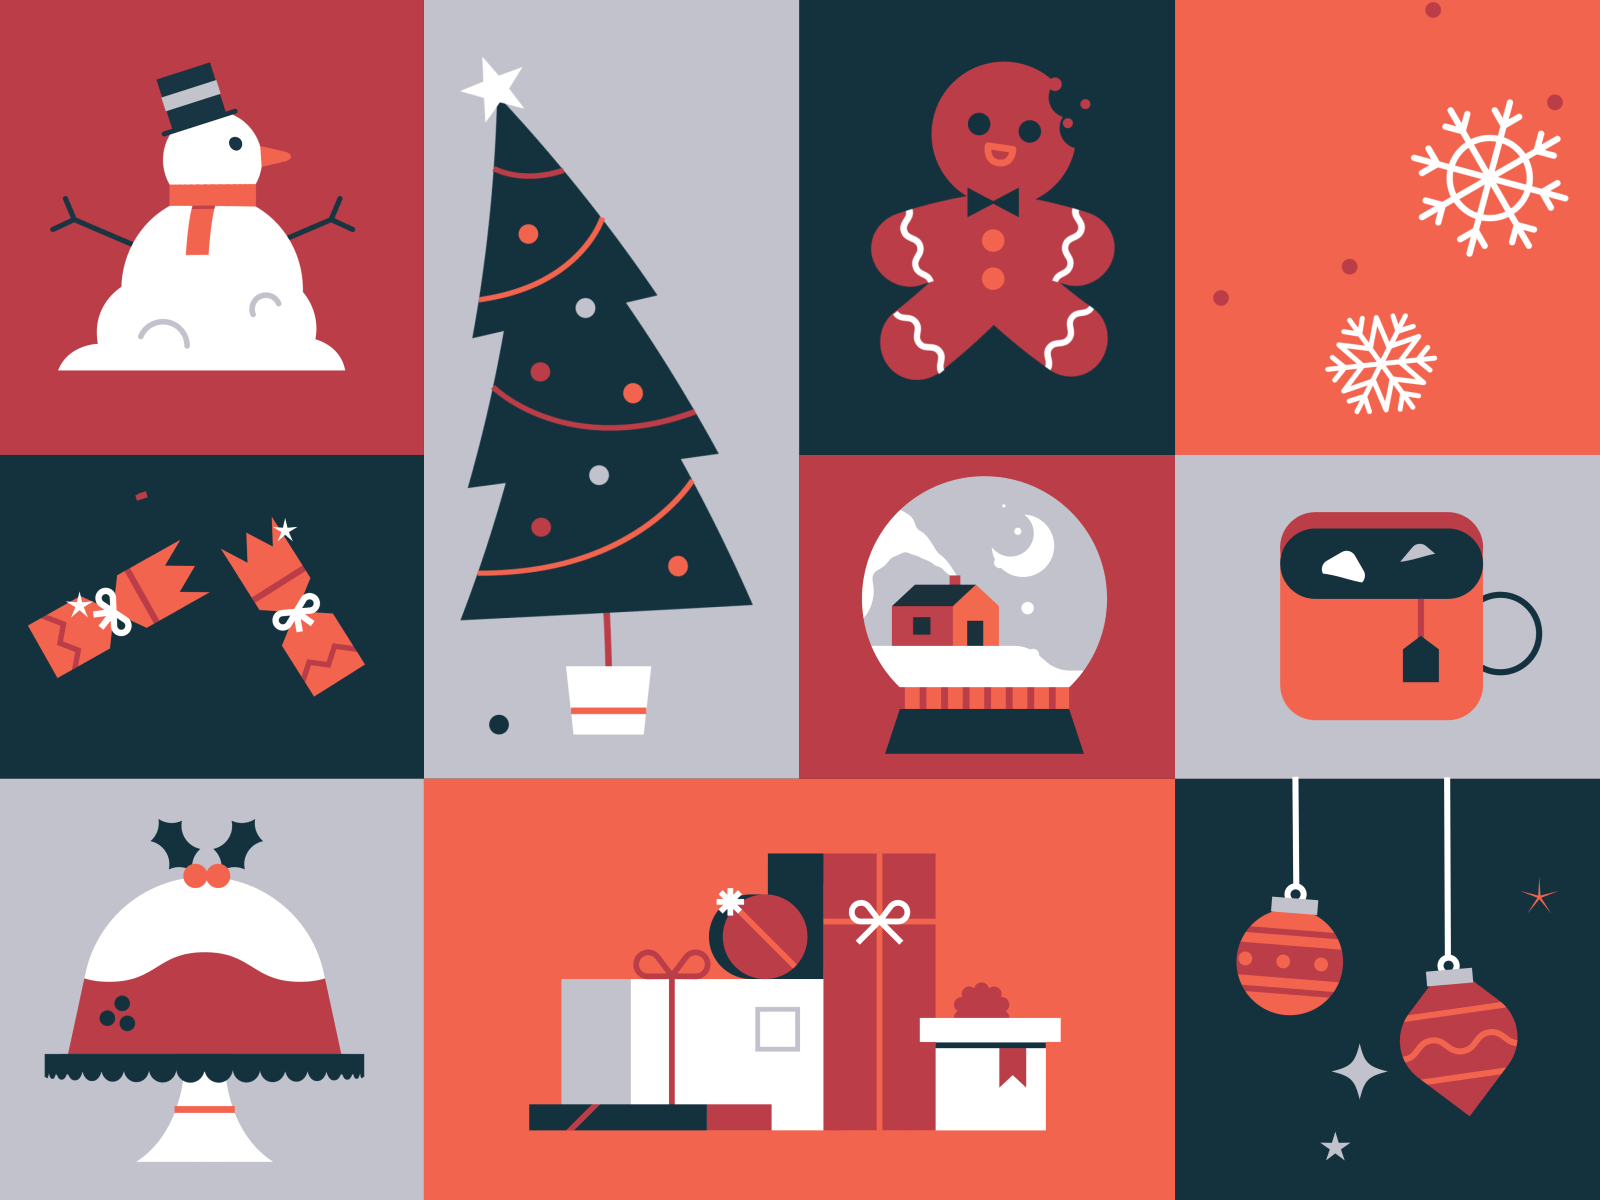 animated christmas tree with presents